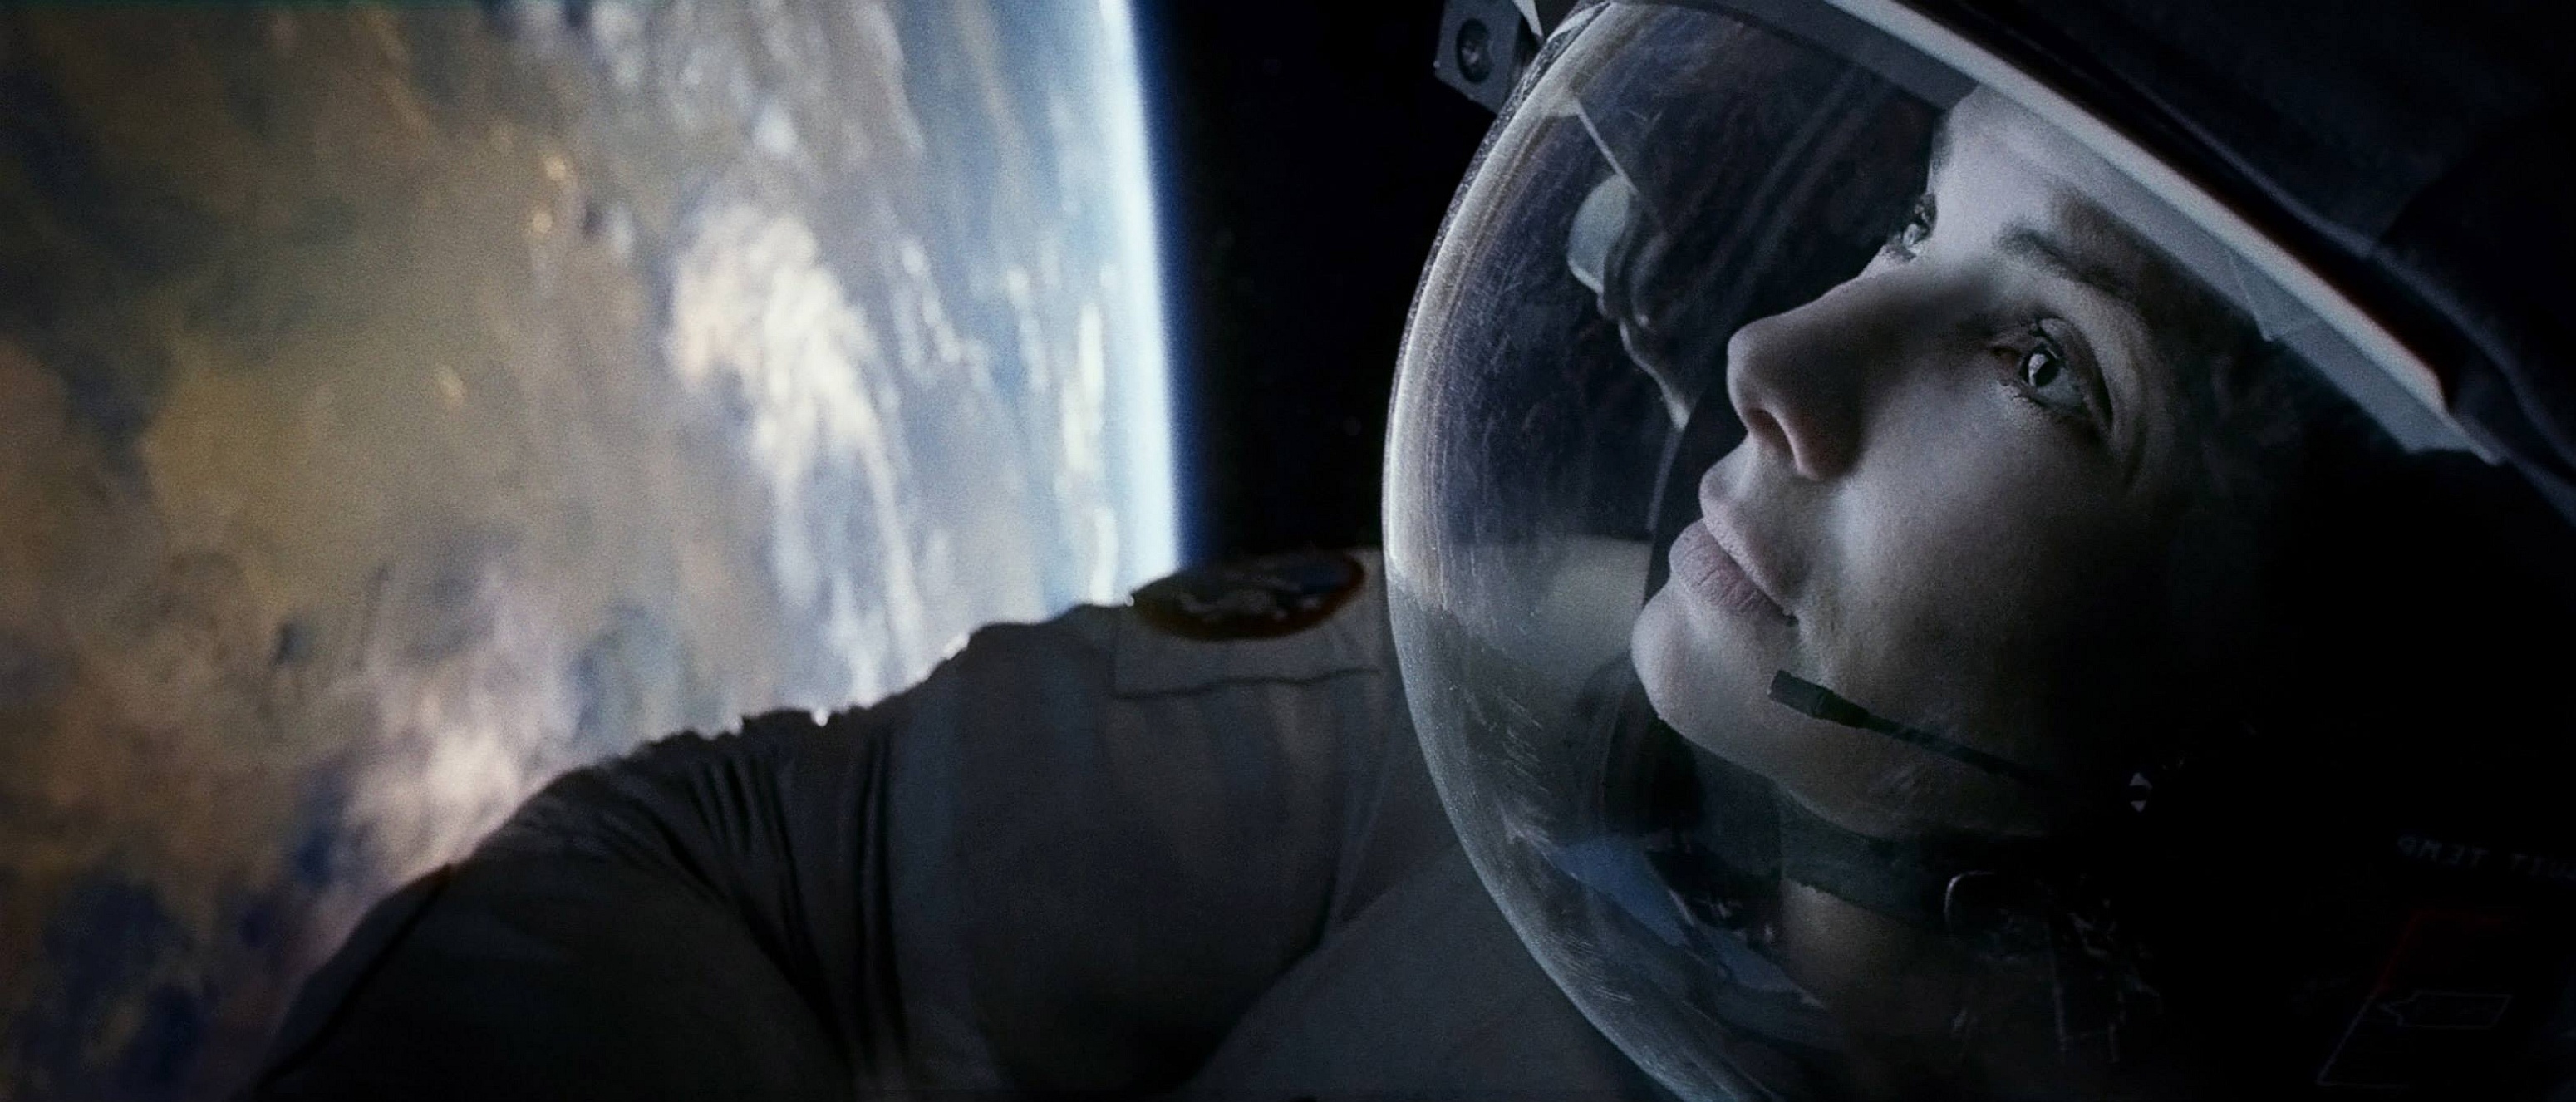 Gravity movie, High-quality wallpapers, Stunning visuals, Captivating cinematography, 3100x1330 Dual Screen Desktop